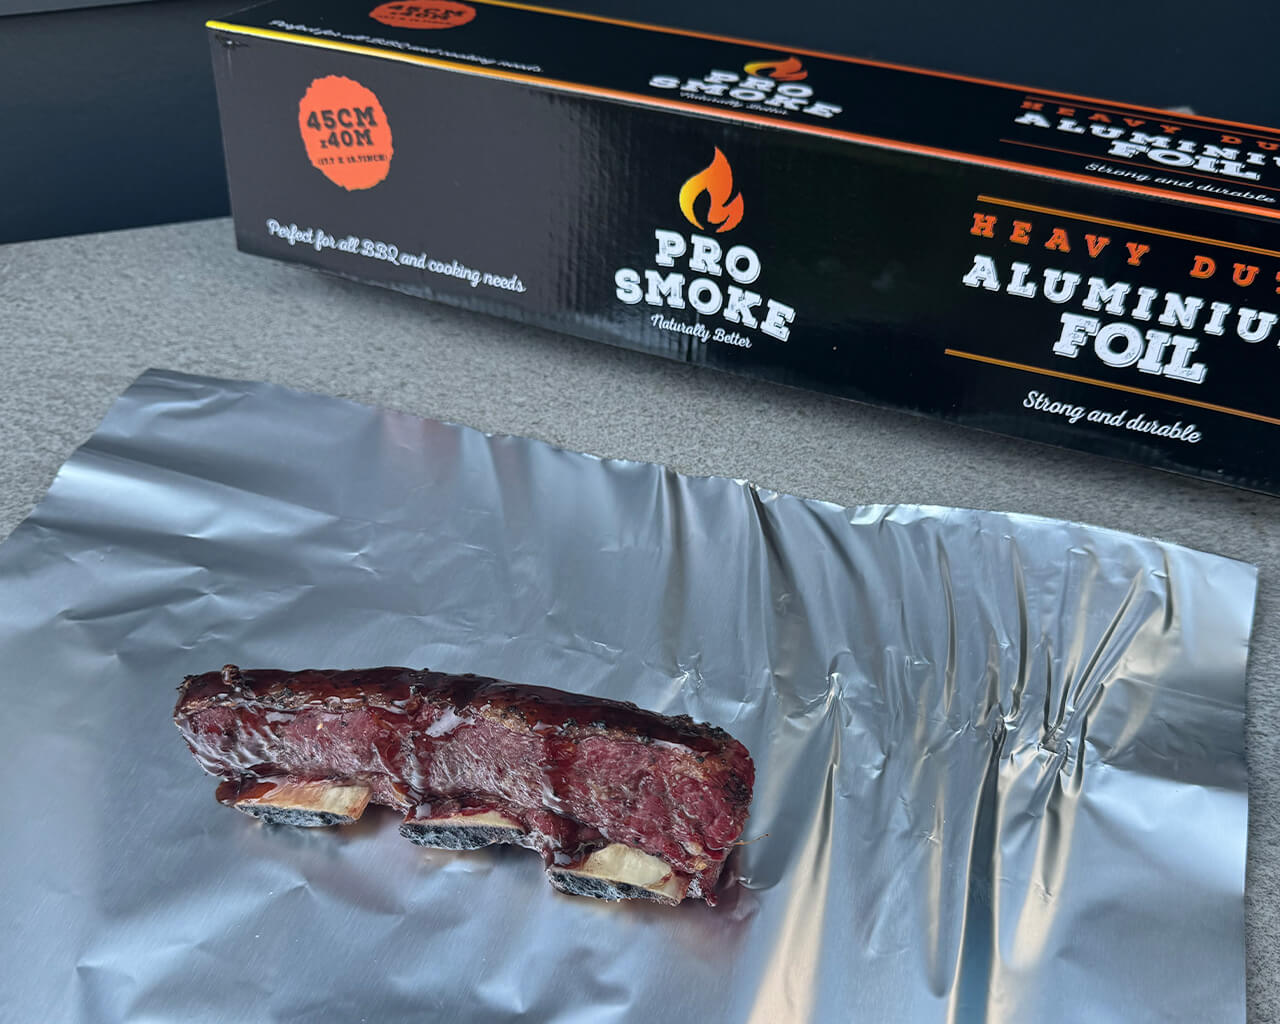 Pro Smoke Heavy Duty BBQ Aluminum Foil - 40m, , hi-res image number null